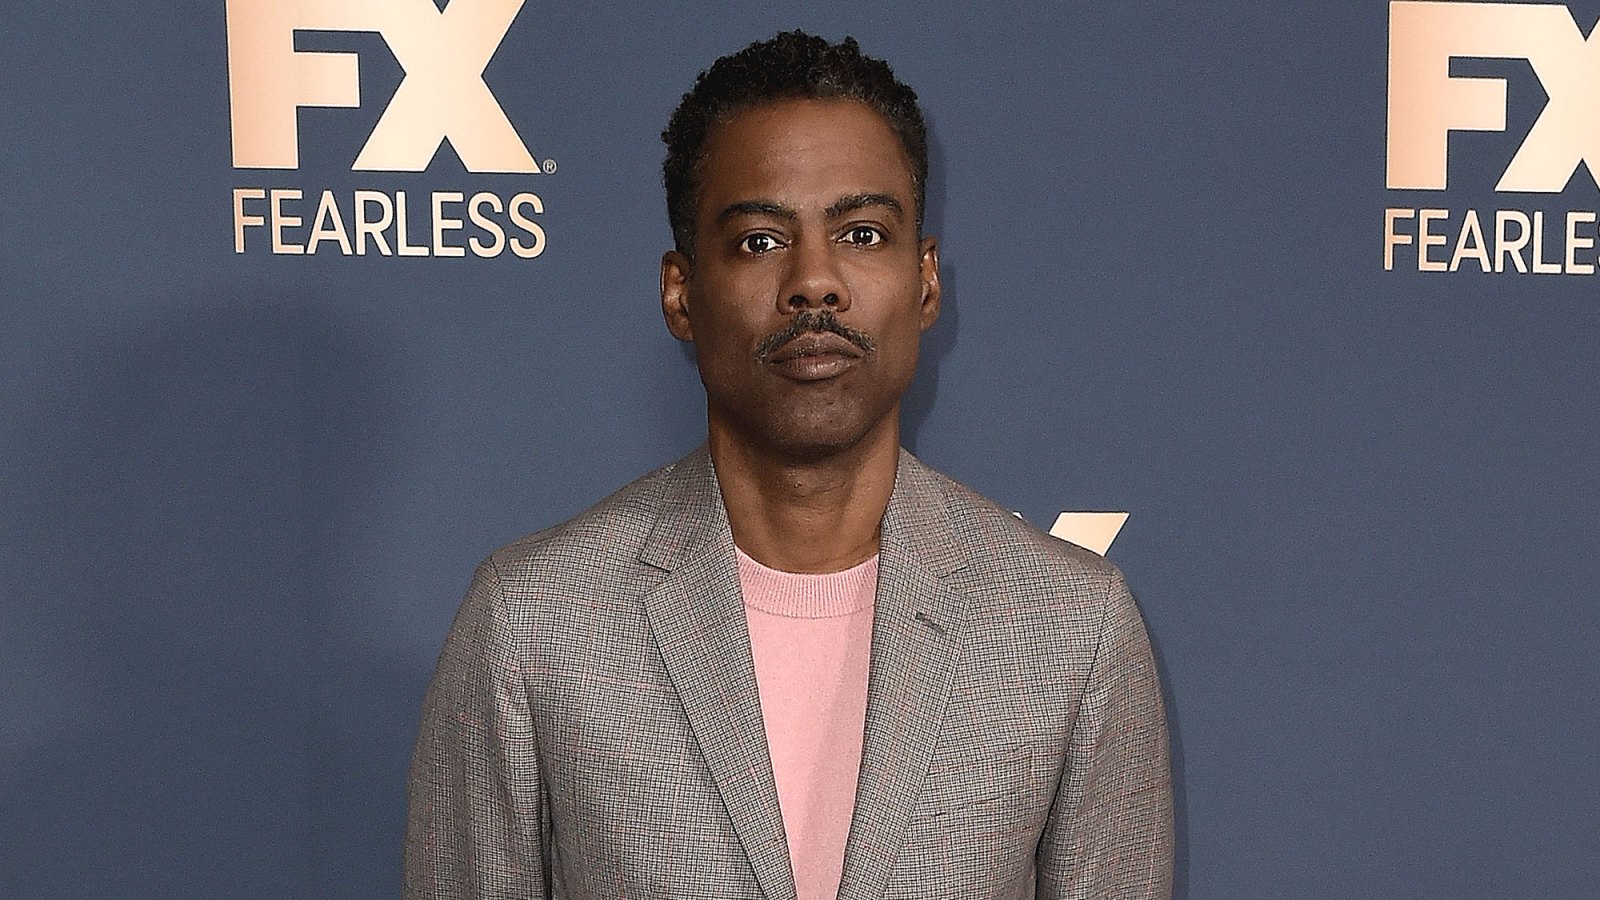 Chris Rock Turned Down a ‘S–t Load’ of Money to Host the 2023 Golden Globes Following Oscars Incident